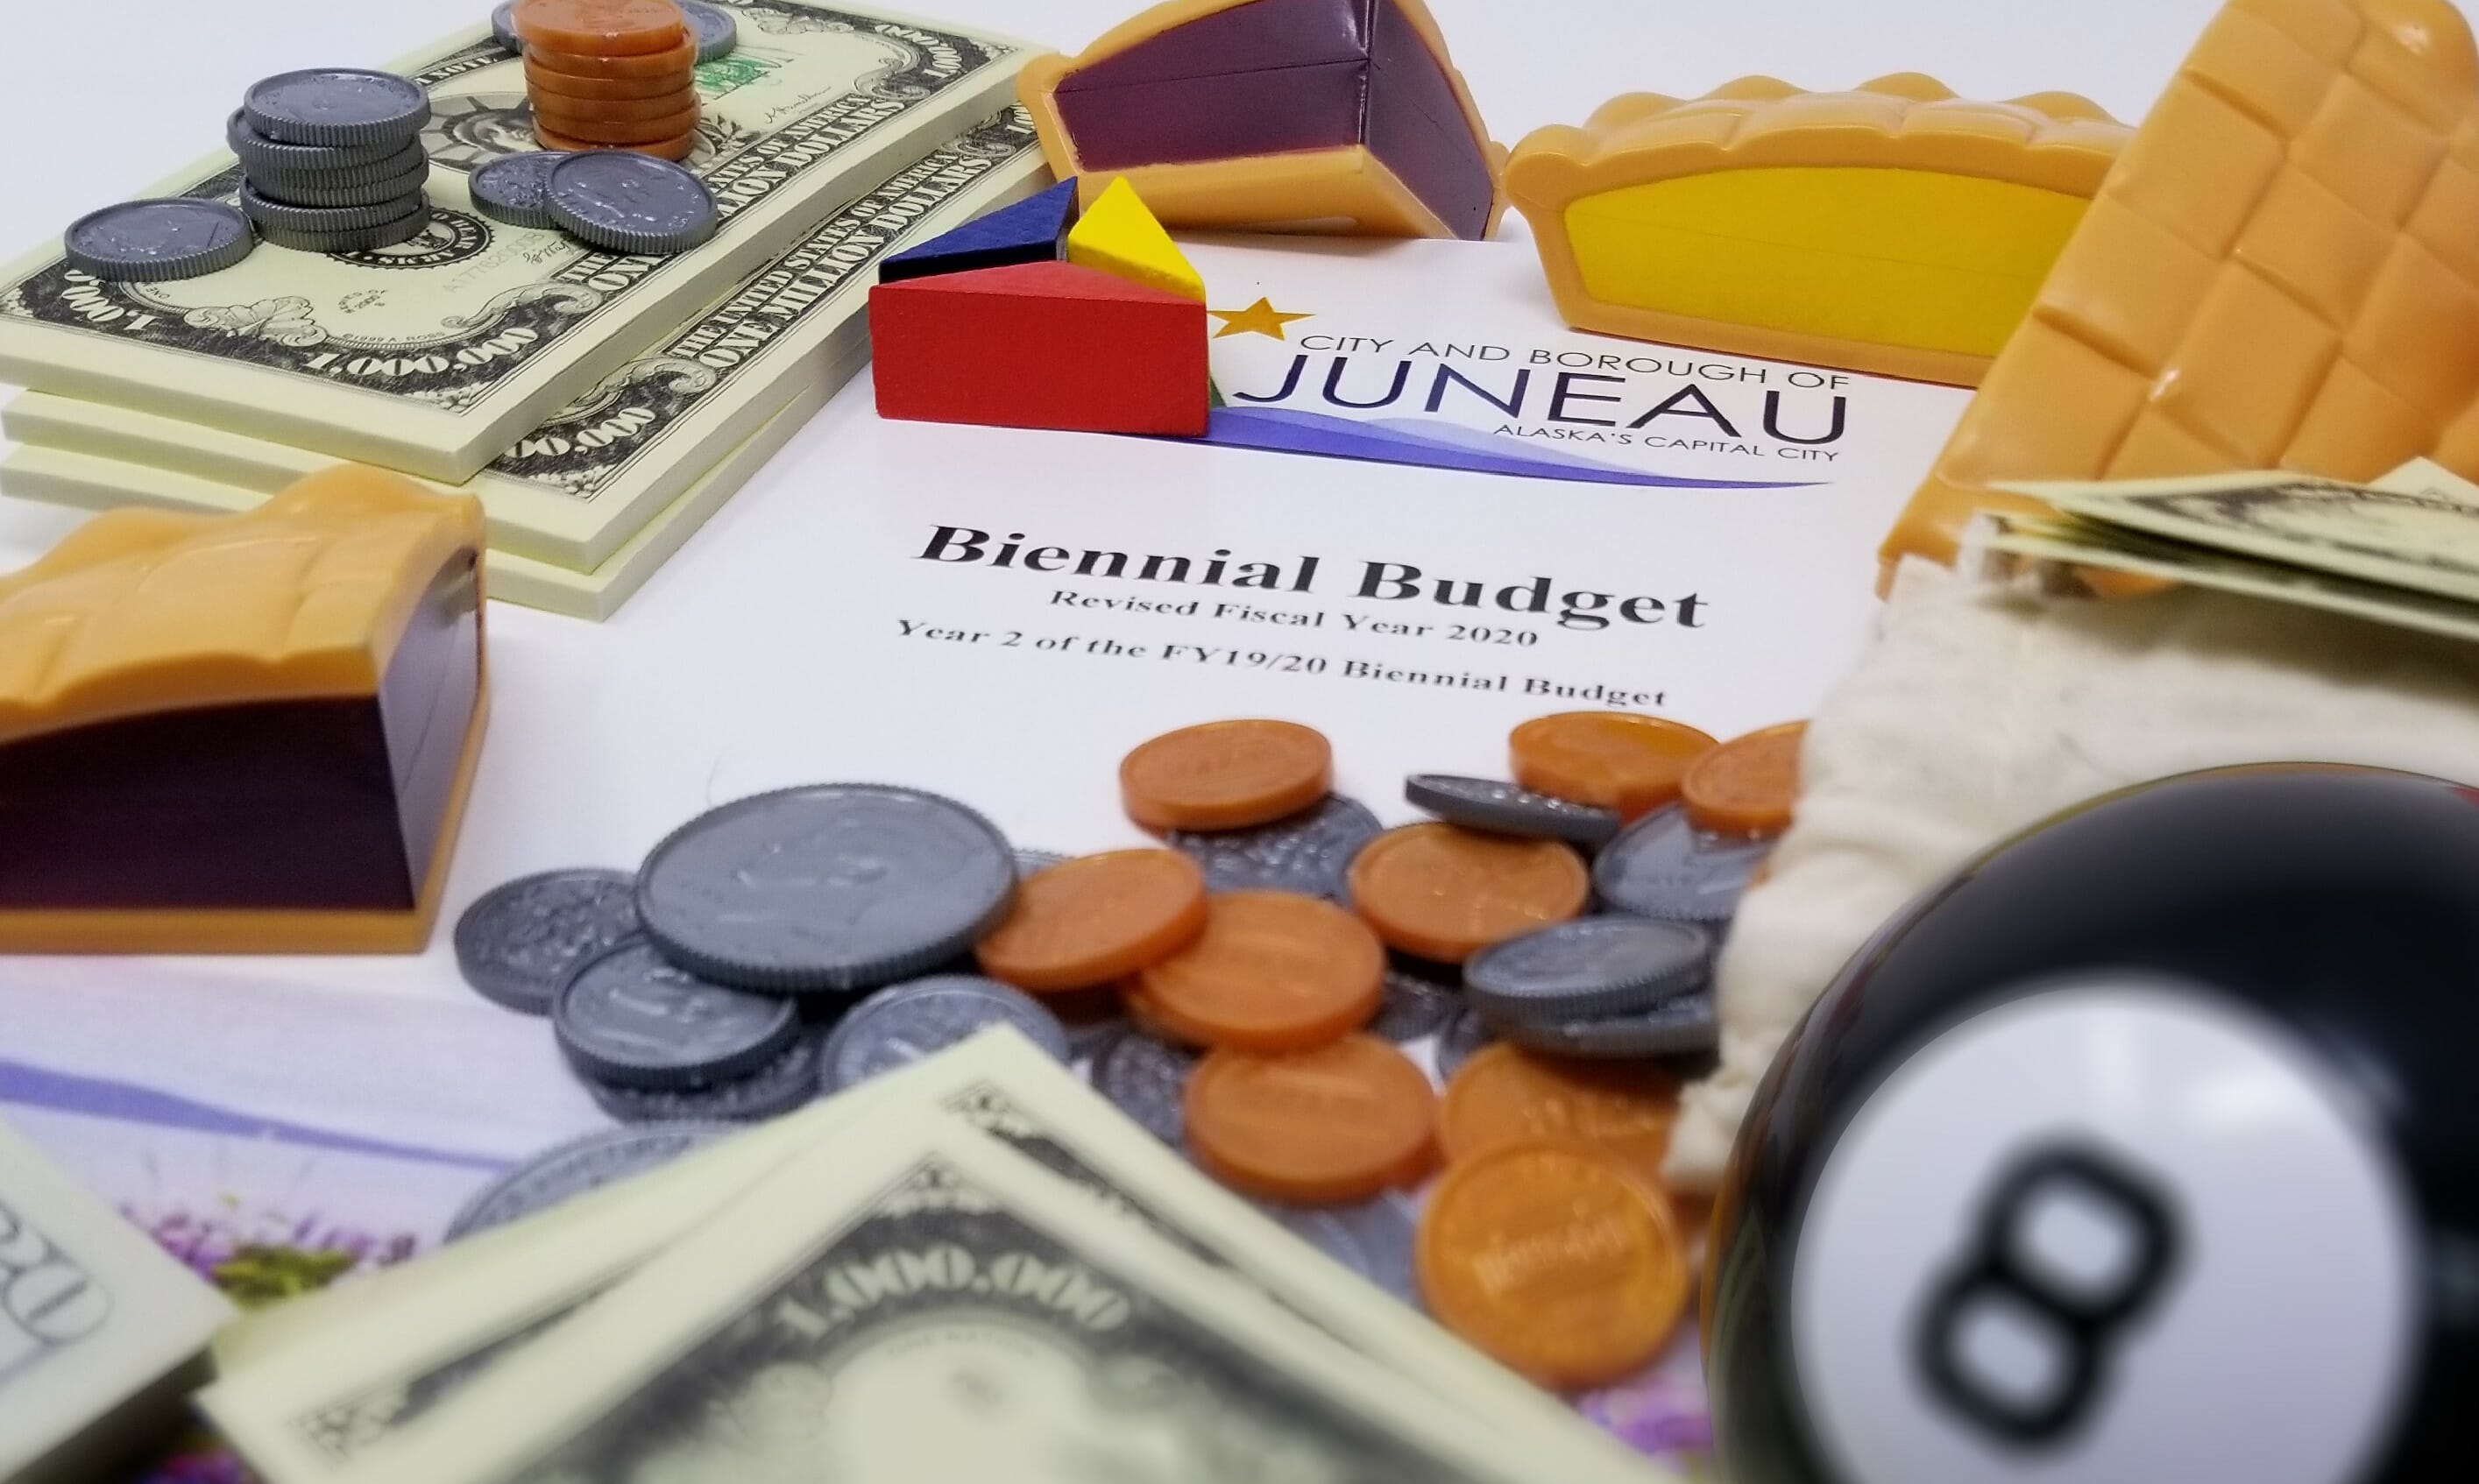 This is a staged image of the 2019 Budget Book amidst finance props like a Magic 8 ball, fake money, fake pie slices